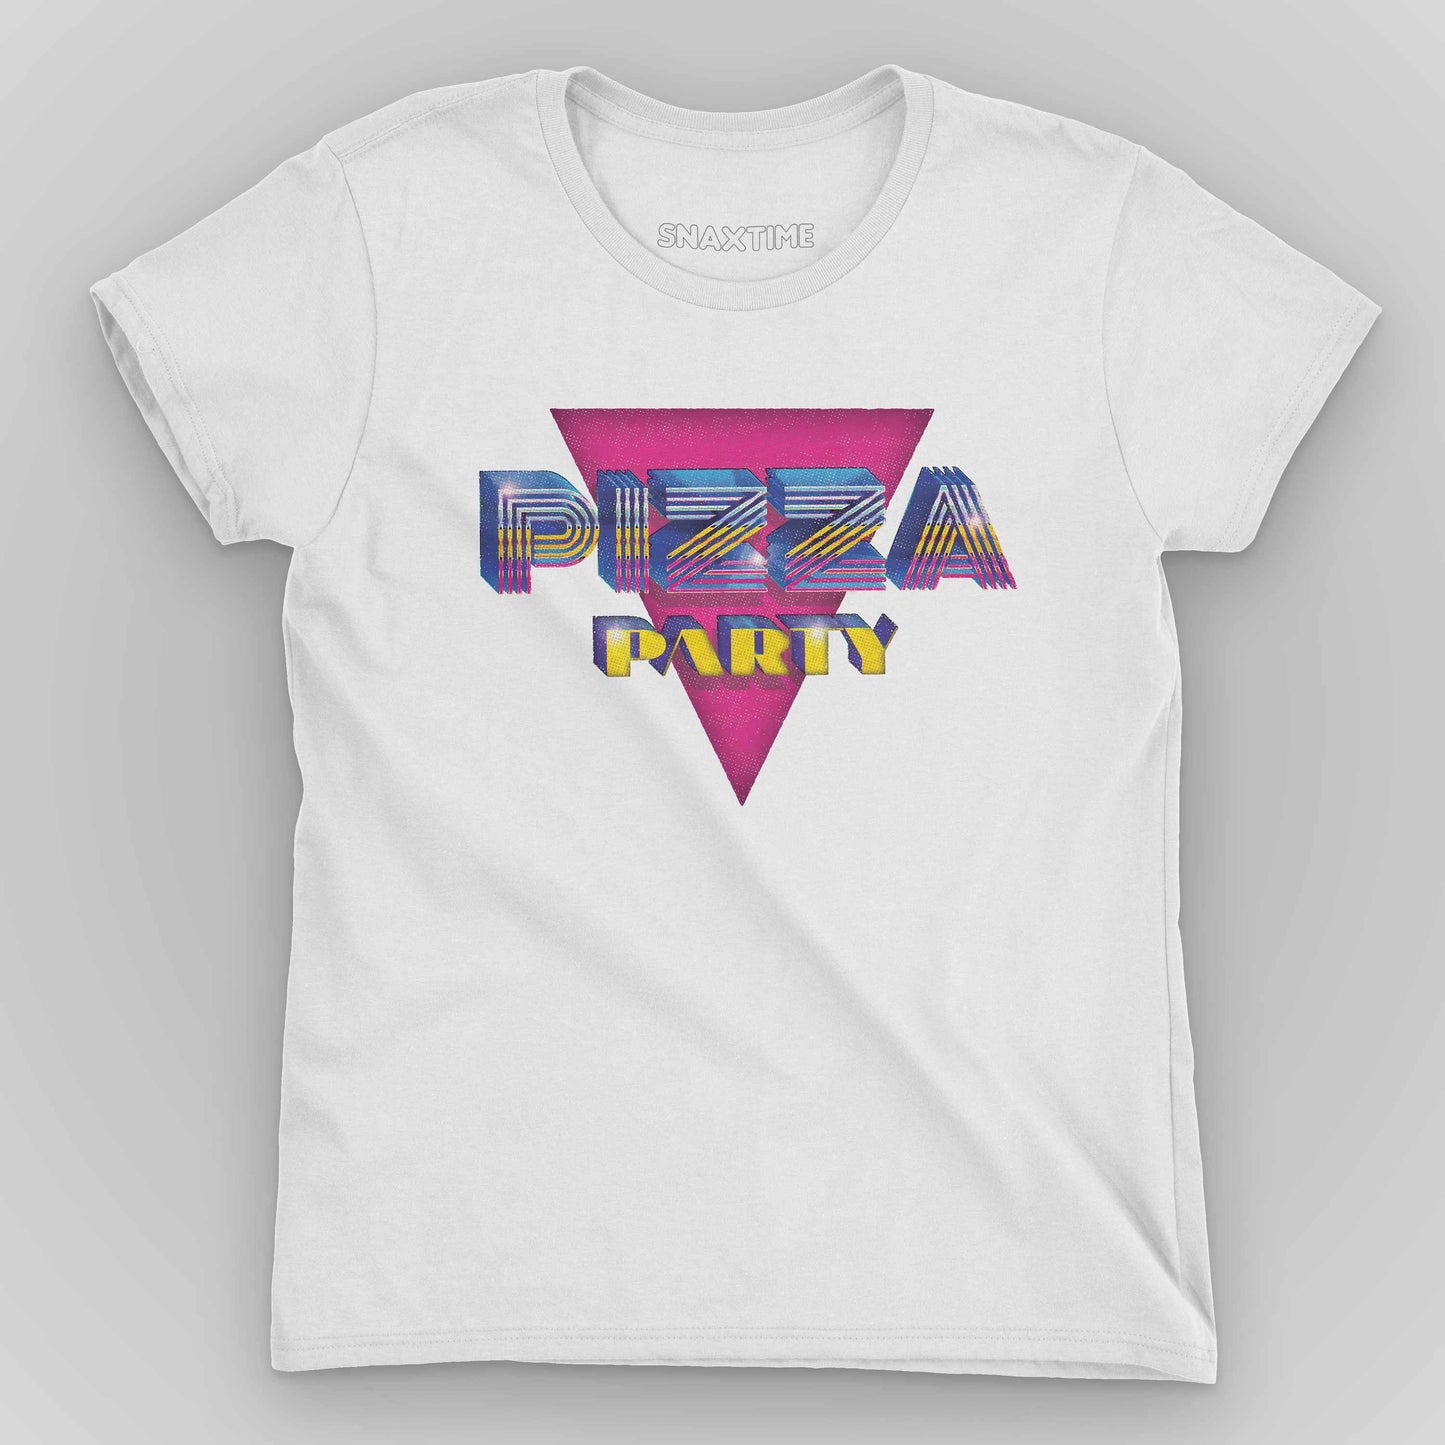 White Pizza Party Women's Graphic T-Shirt by Snaxtime